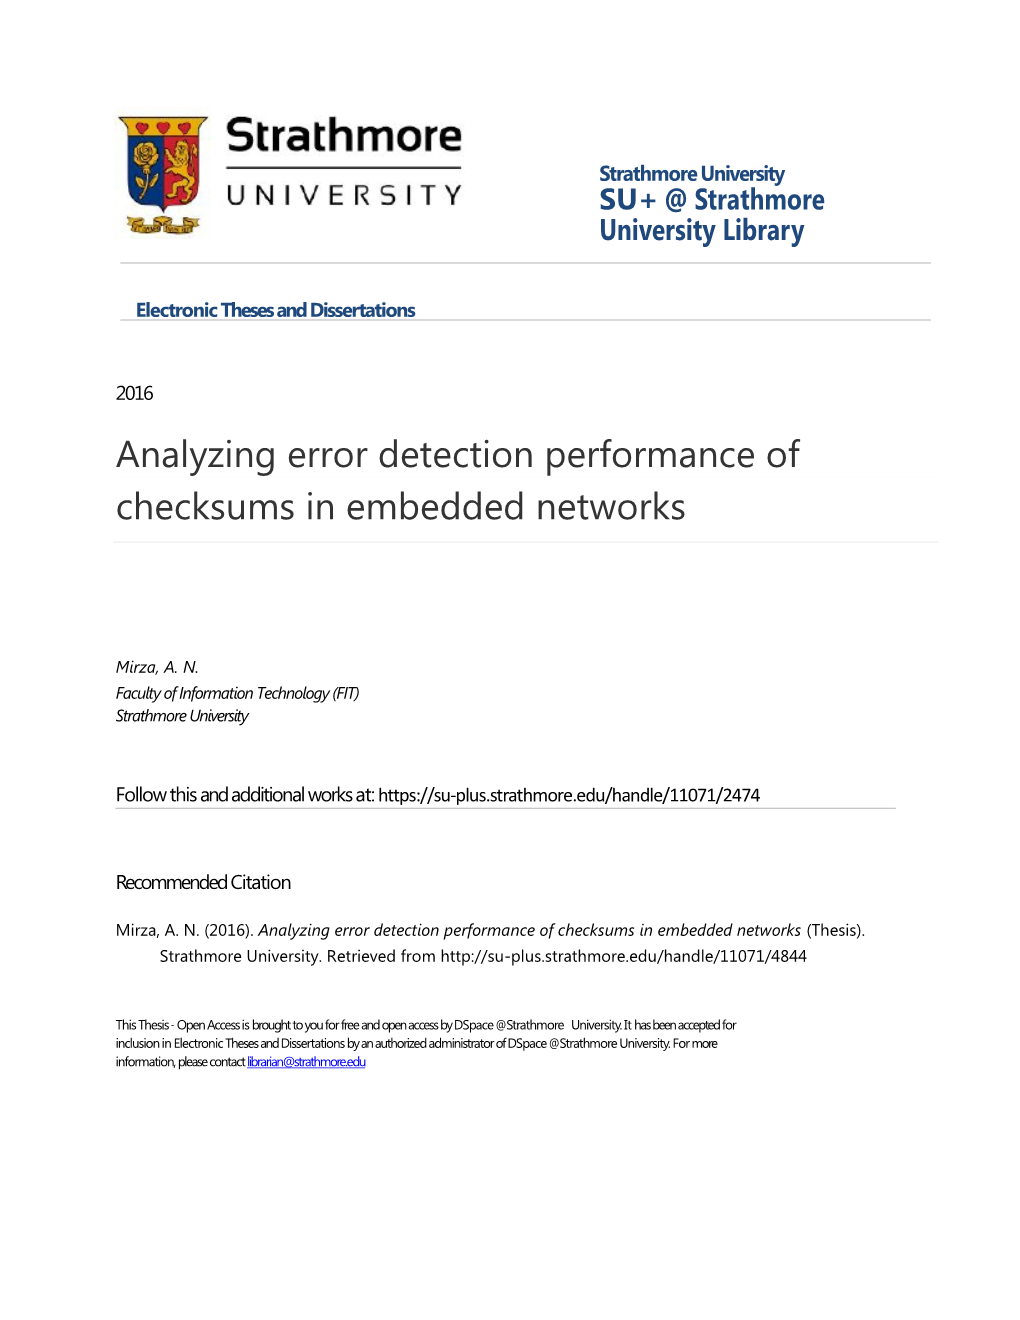 Analyzing Error Detection Performance of Checksums in Embedded Networks